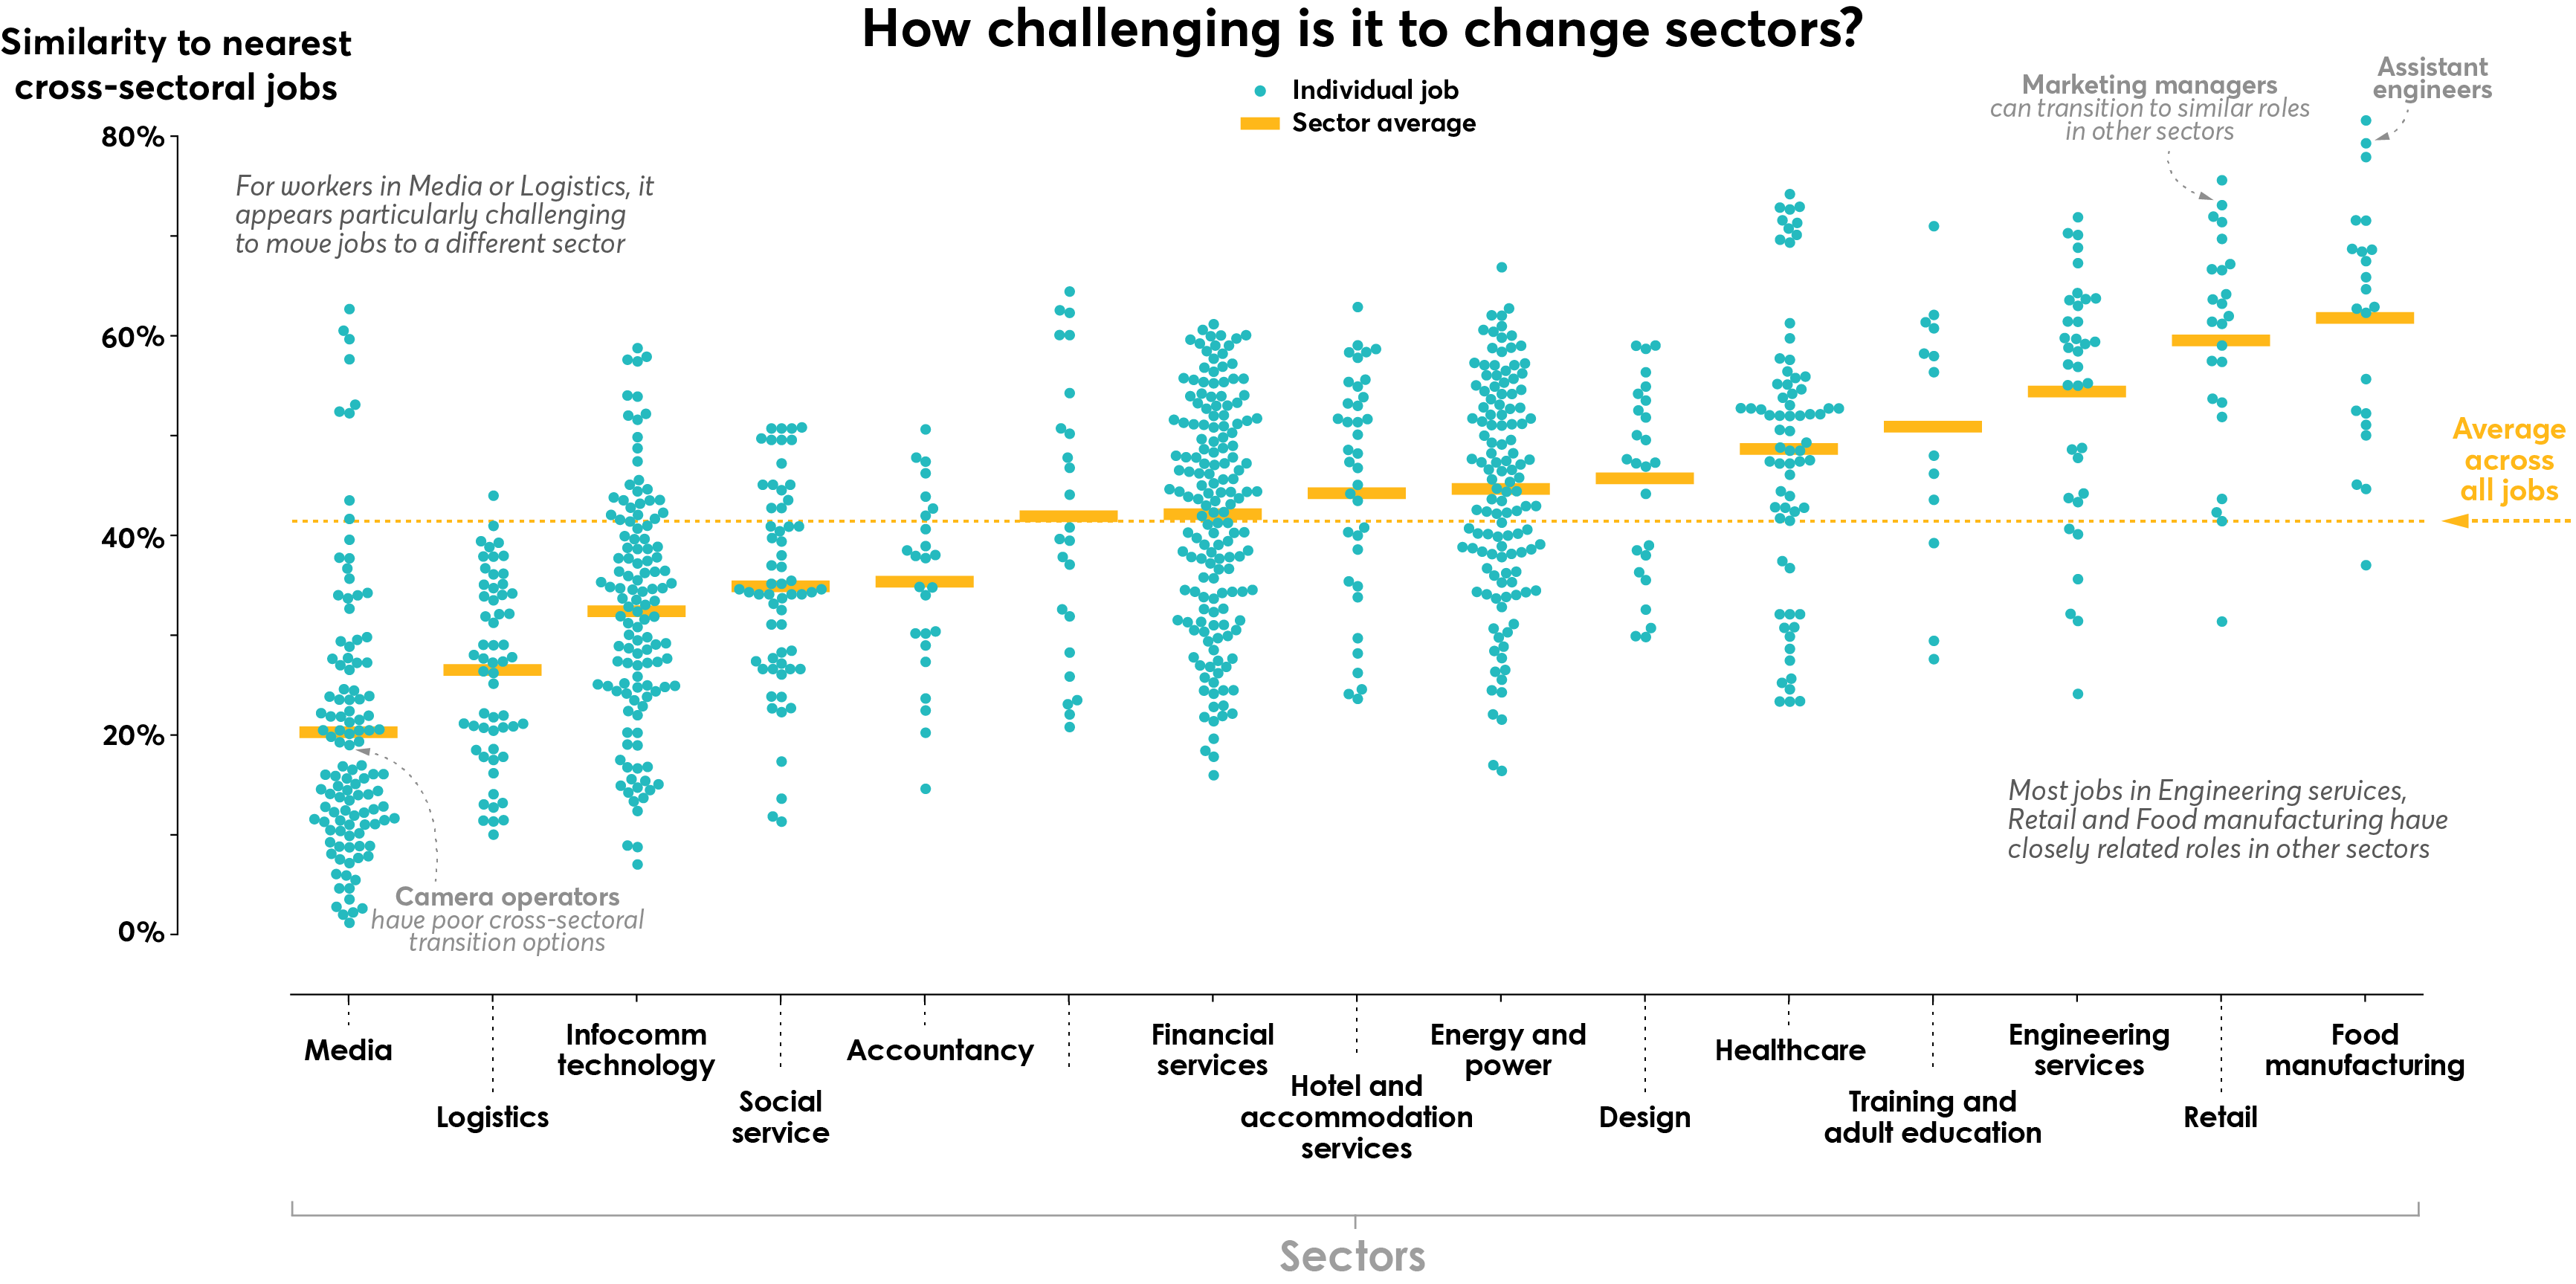 A chart showing how difficult it is to change sectors based on your current job